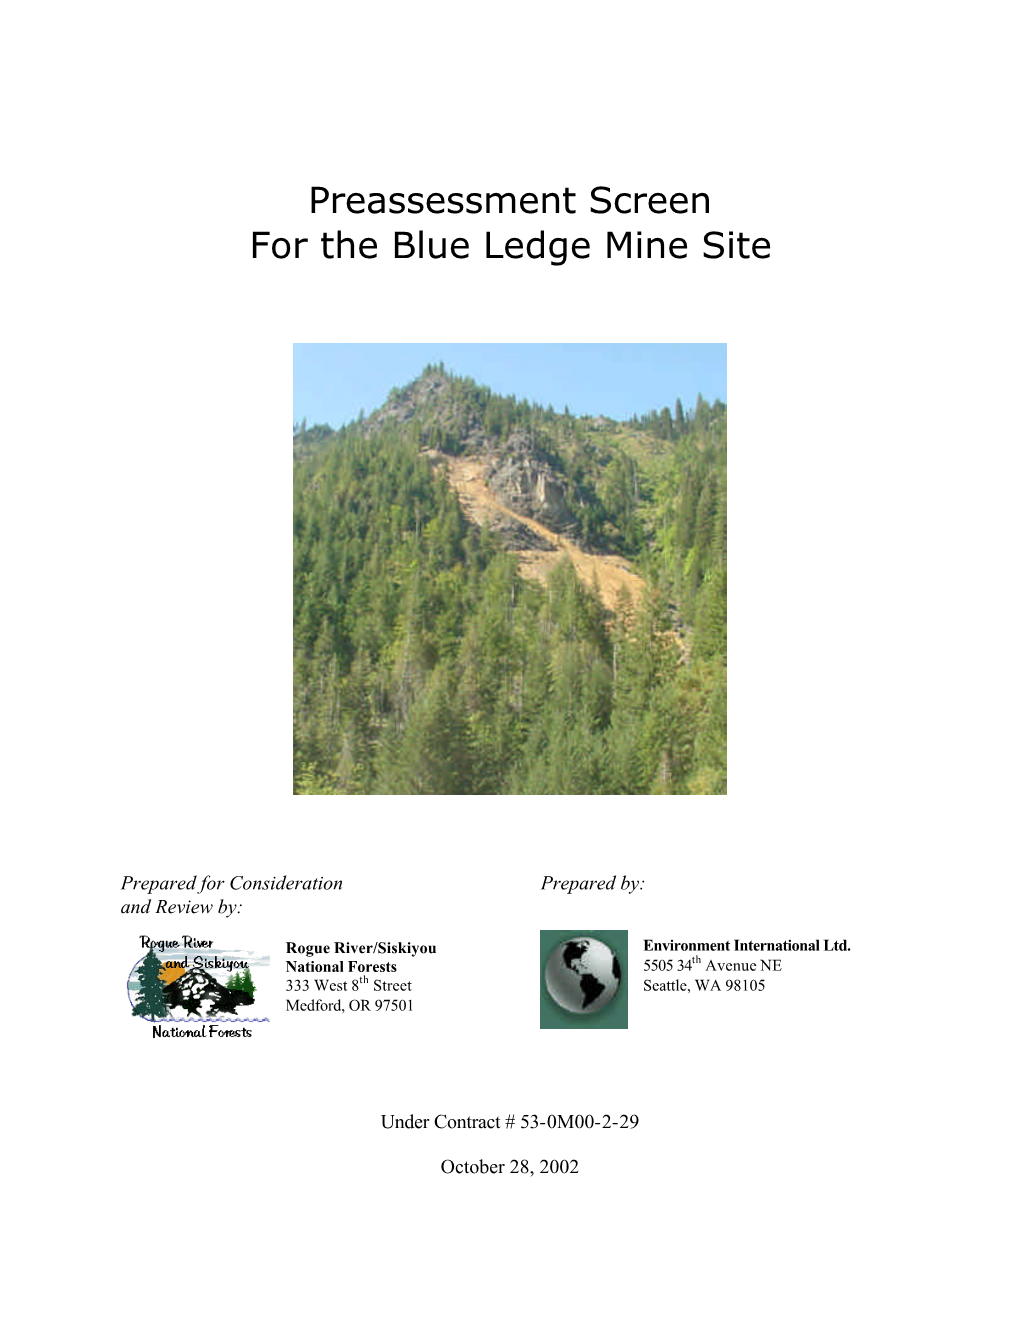 Preassessment Screen for the Blue Ledge Mine Site